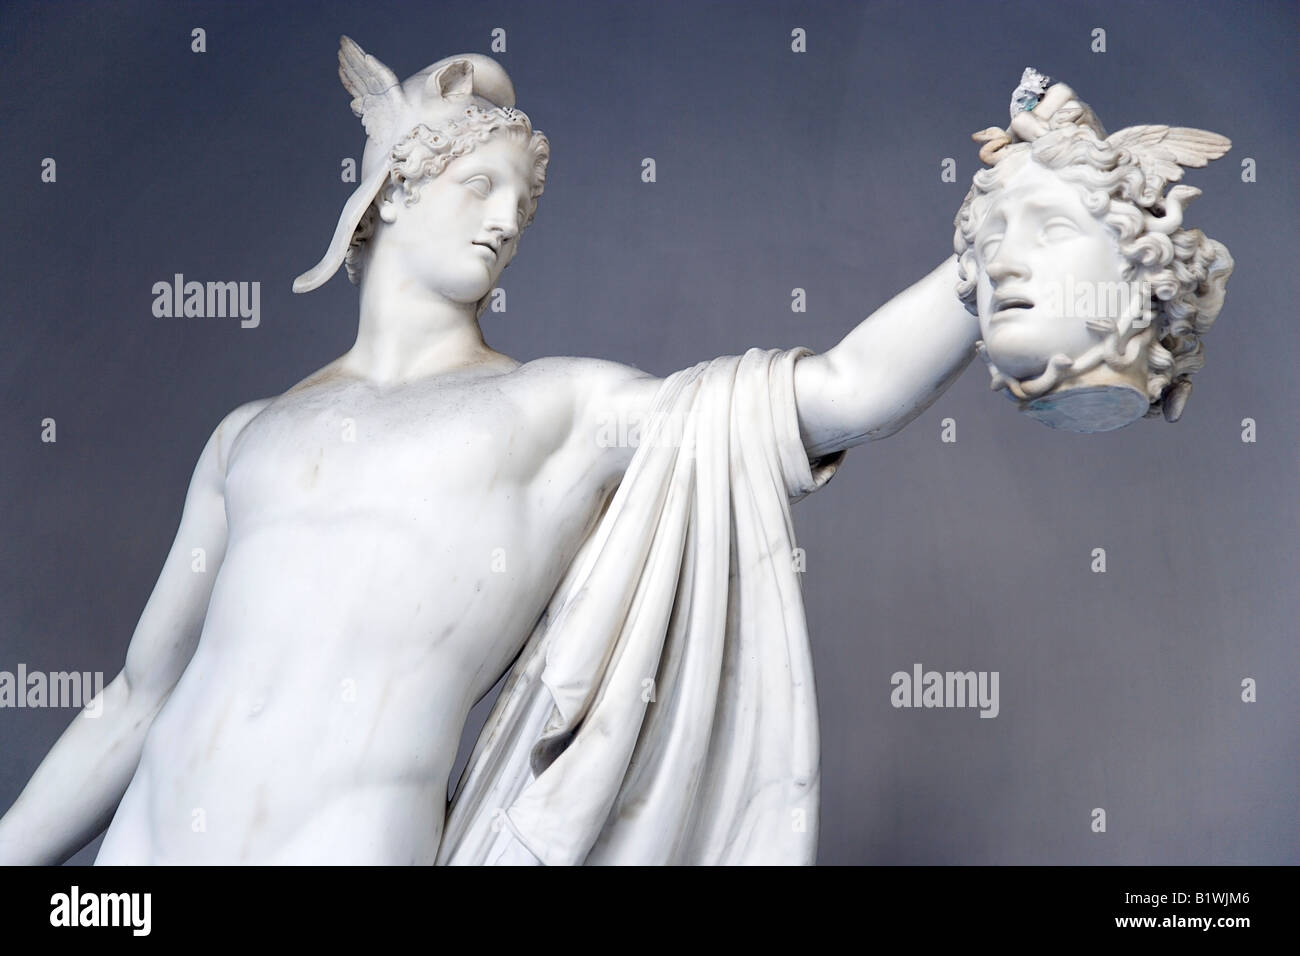 ITALY Lazio Rome Vatican City Museum Belevdere Palace Marble statue of Perseus holding severed head of Medusa by Antonio Canova Stock Photo